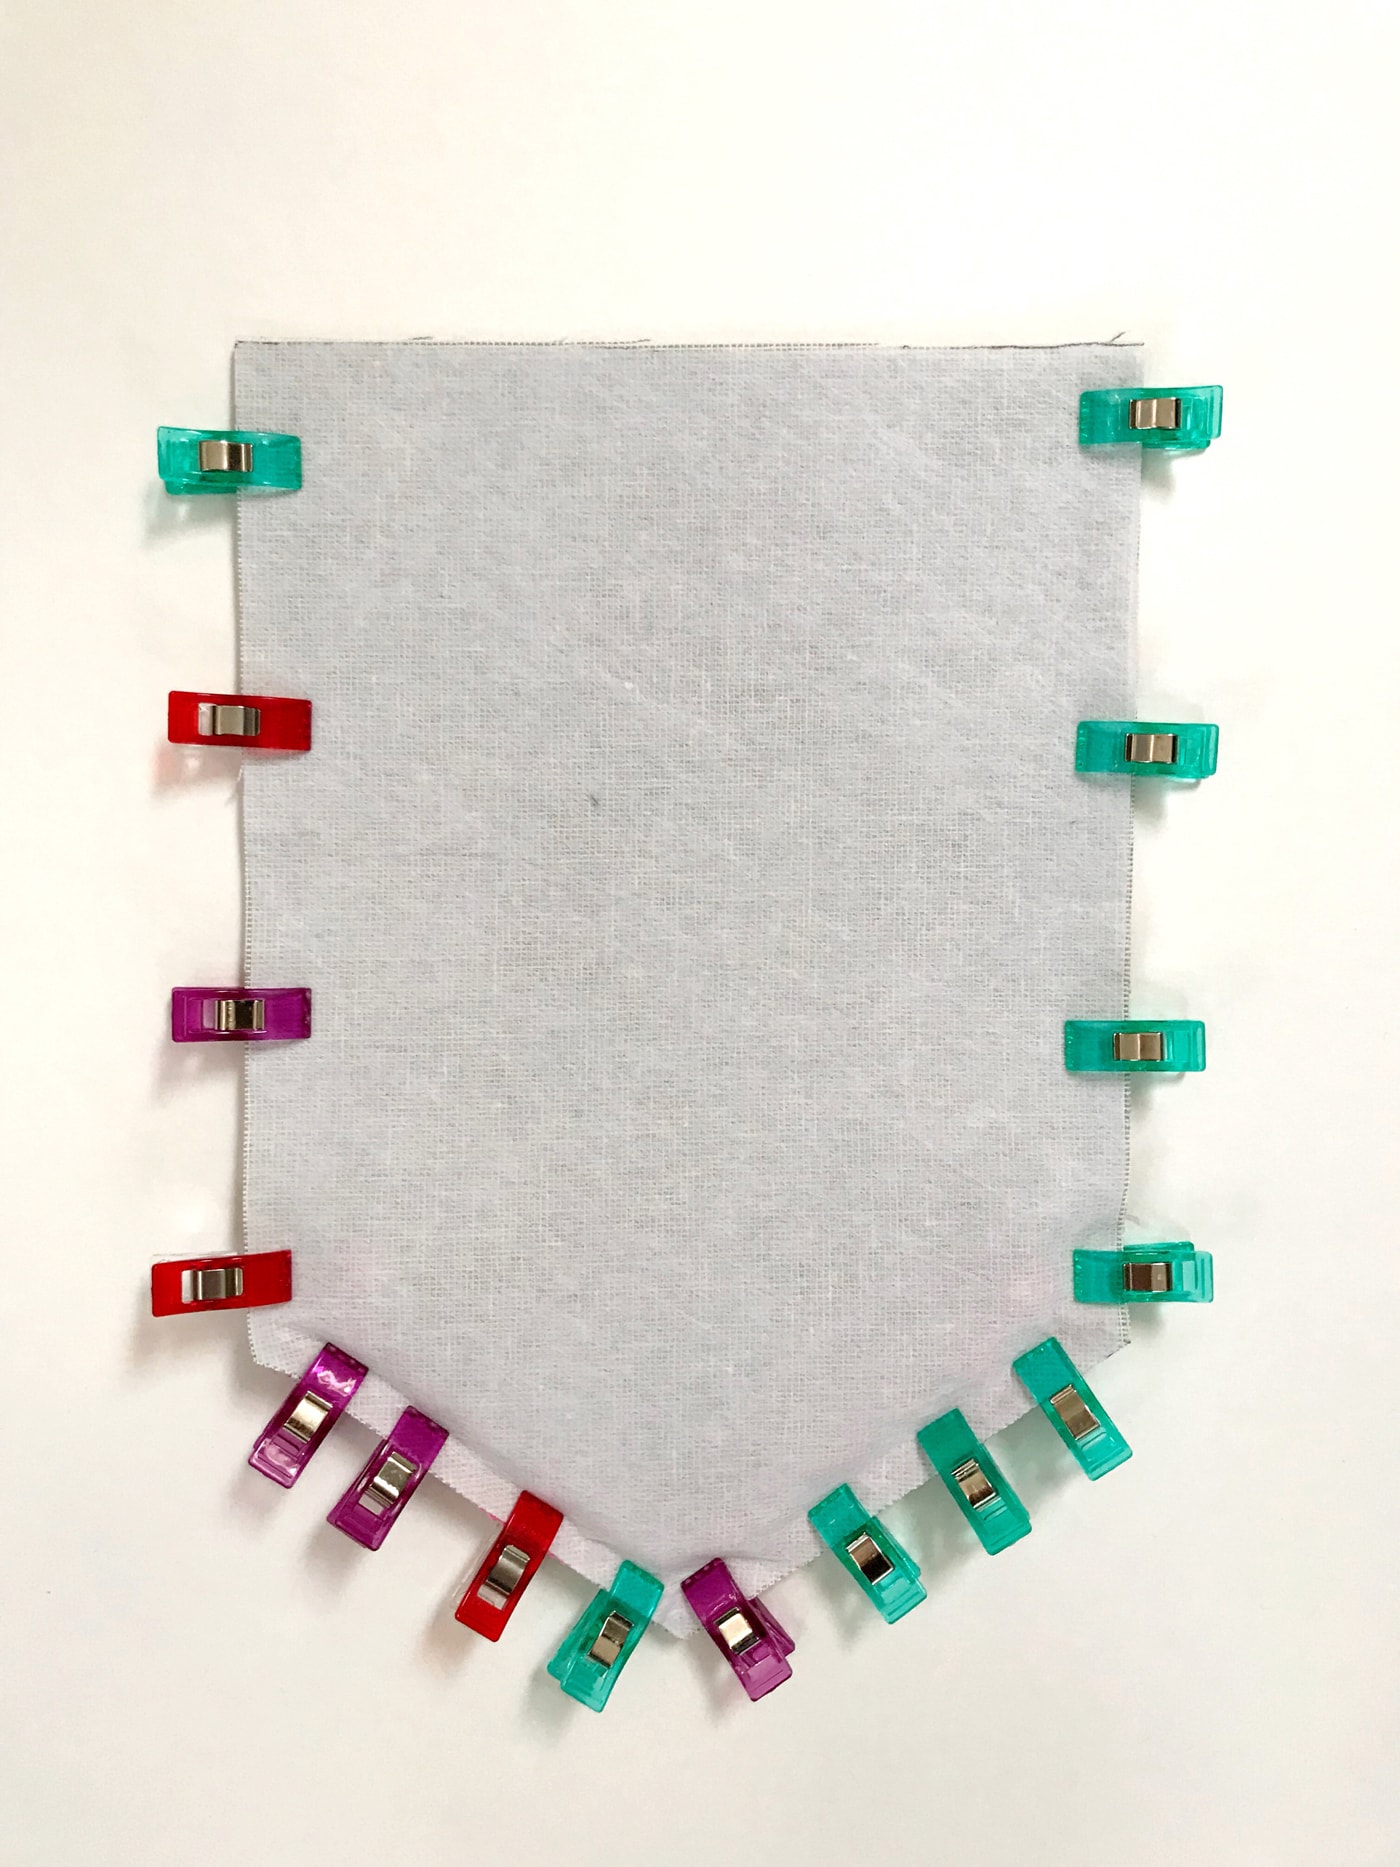 A great enamel pin display idea! Create a banner for your favorite pins with this DIY Enamel Pin Banner Tutorial. #enamelpins #sewingtutorial #pindisplayideas #bannertutorials #canvasbannertutorial